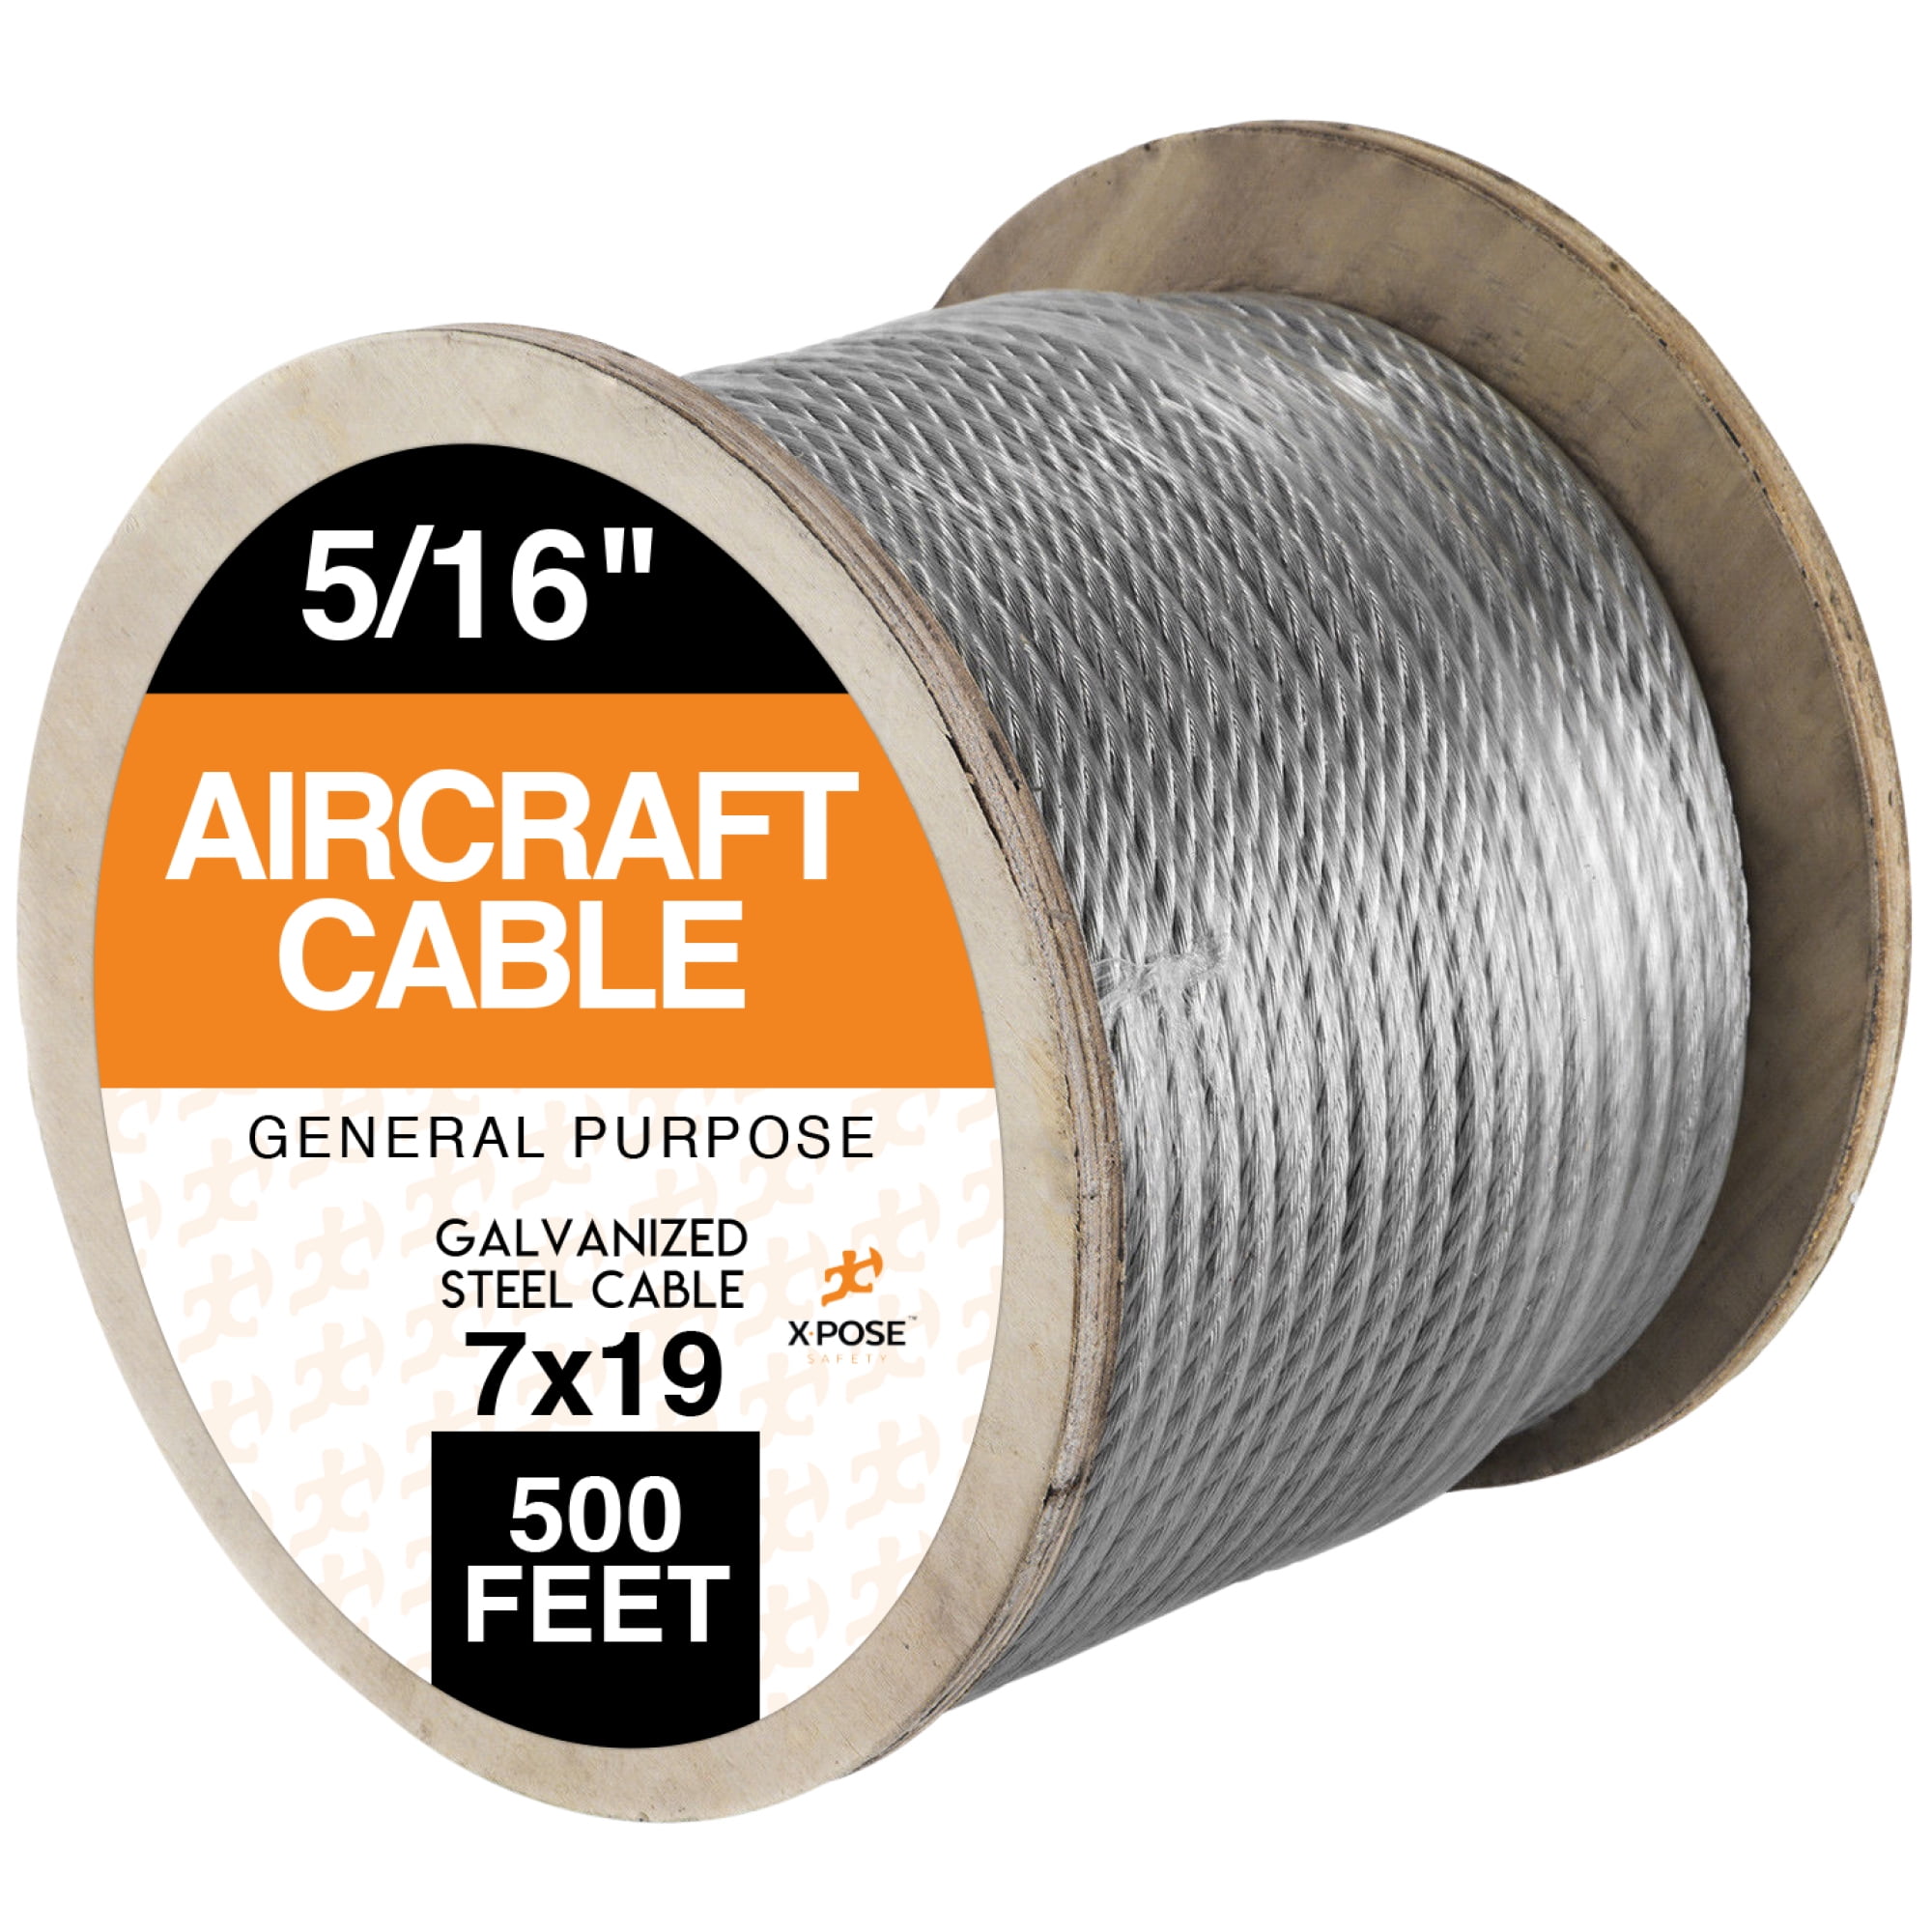 250' 3/16" 7x19 GALVANIZED AIRCRAFT CABLE WIRE ROPE Includes Cable Clips/Clamps 